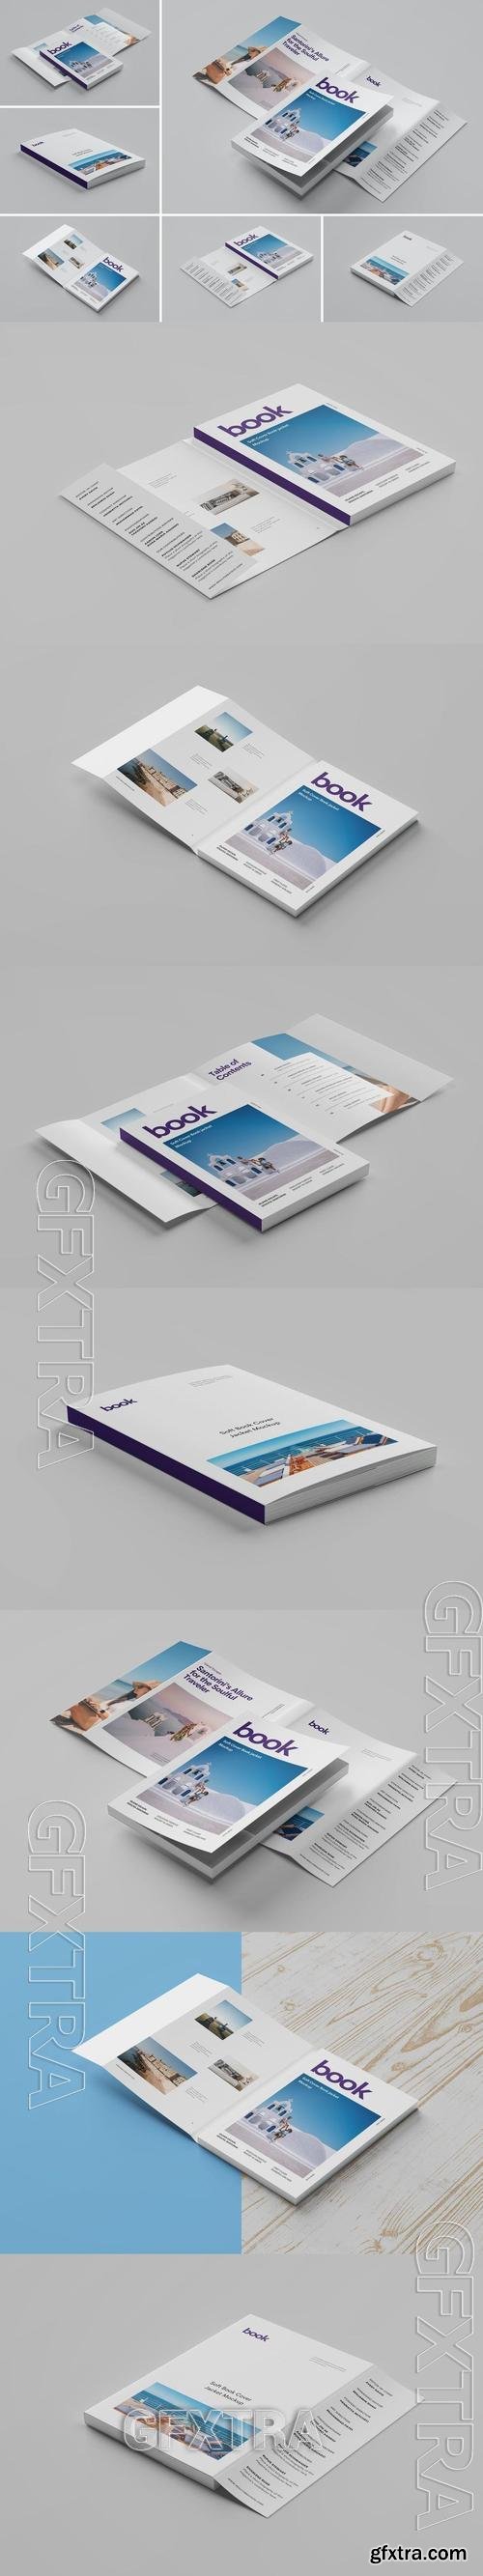 Soft Book Cover Jacket Mockup 7N346ZY